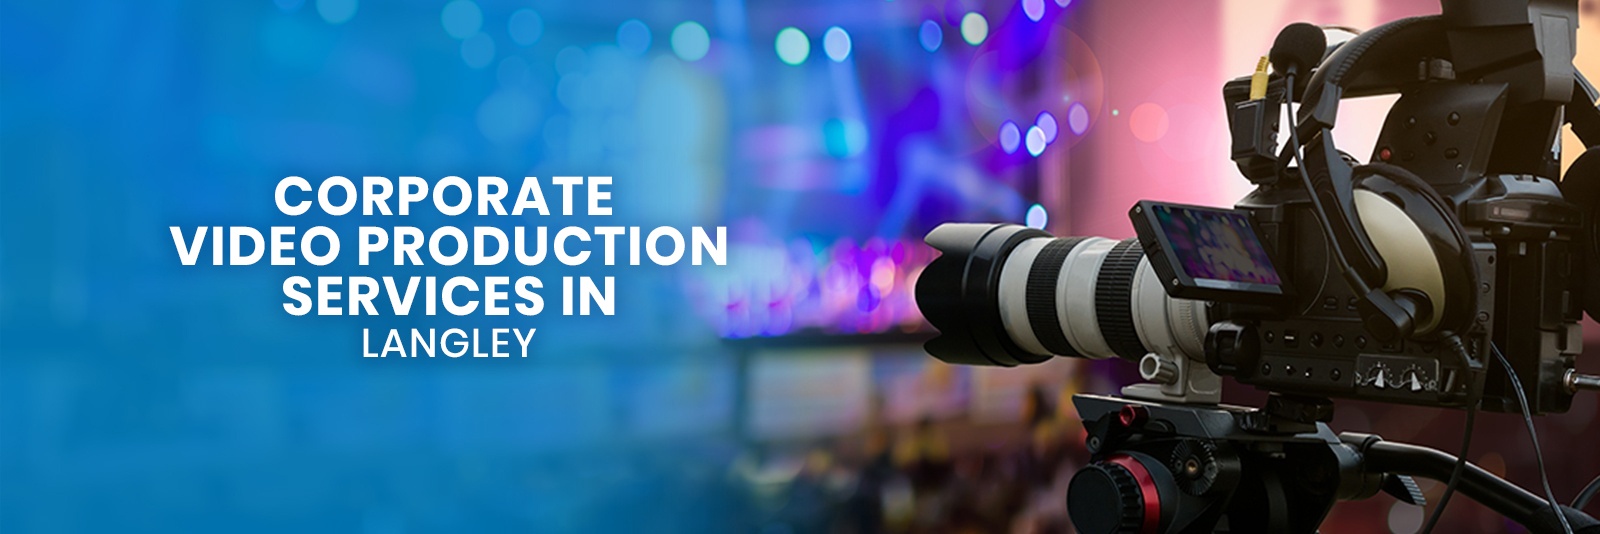 VIDEO PRODUCTION SERVICES IN LANGLEY